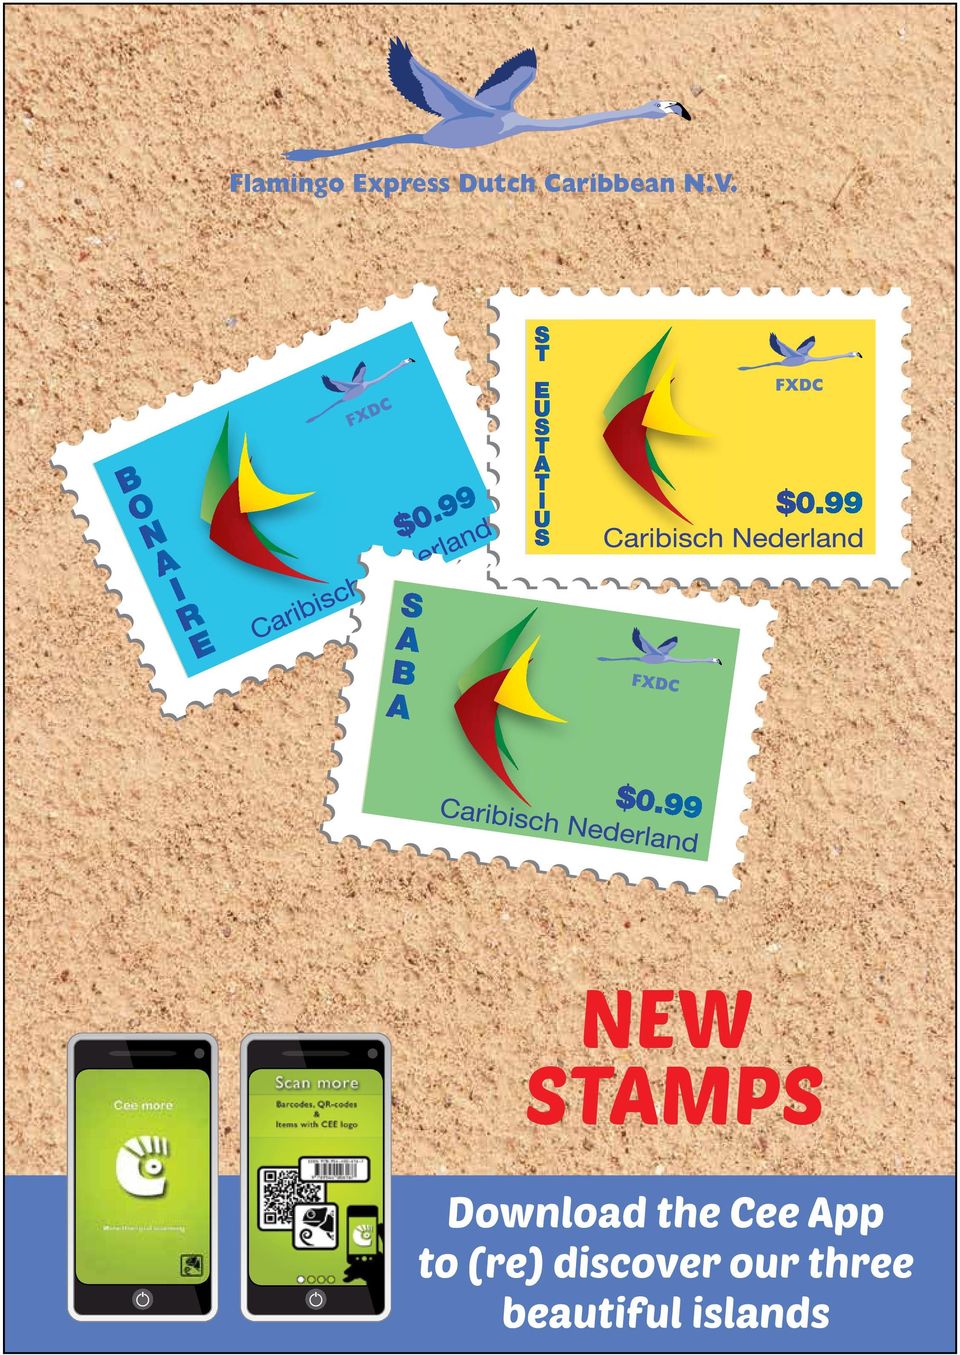 NEW STAMPS Download the Cee